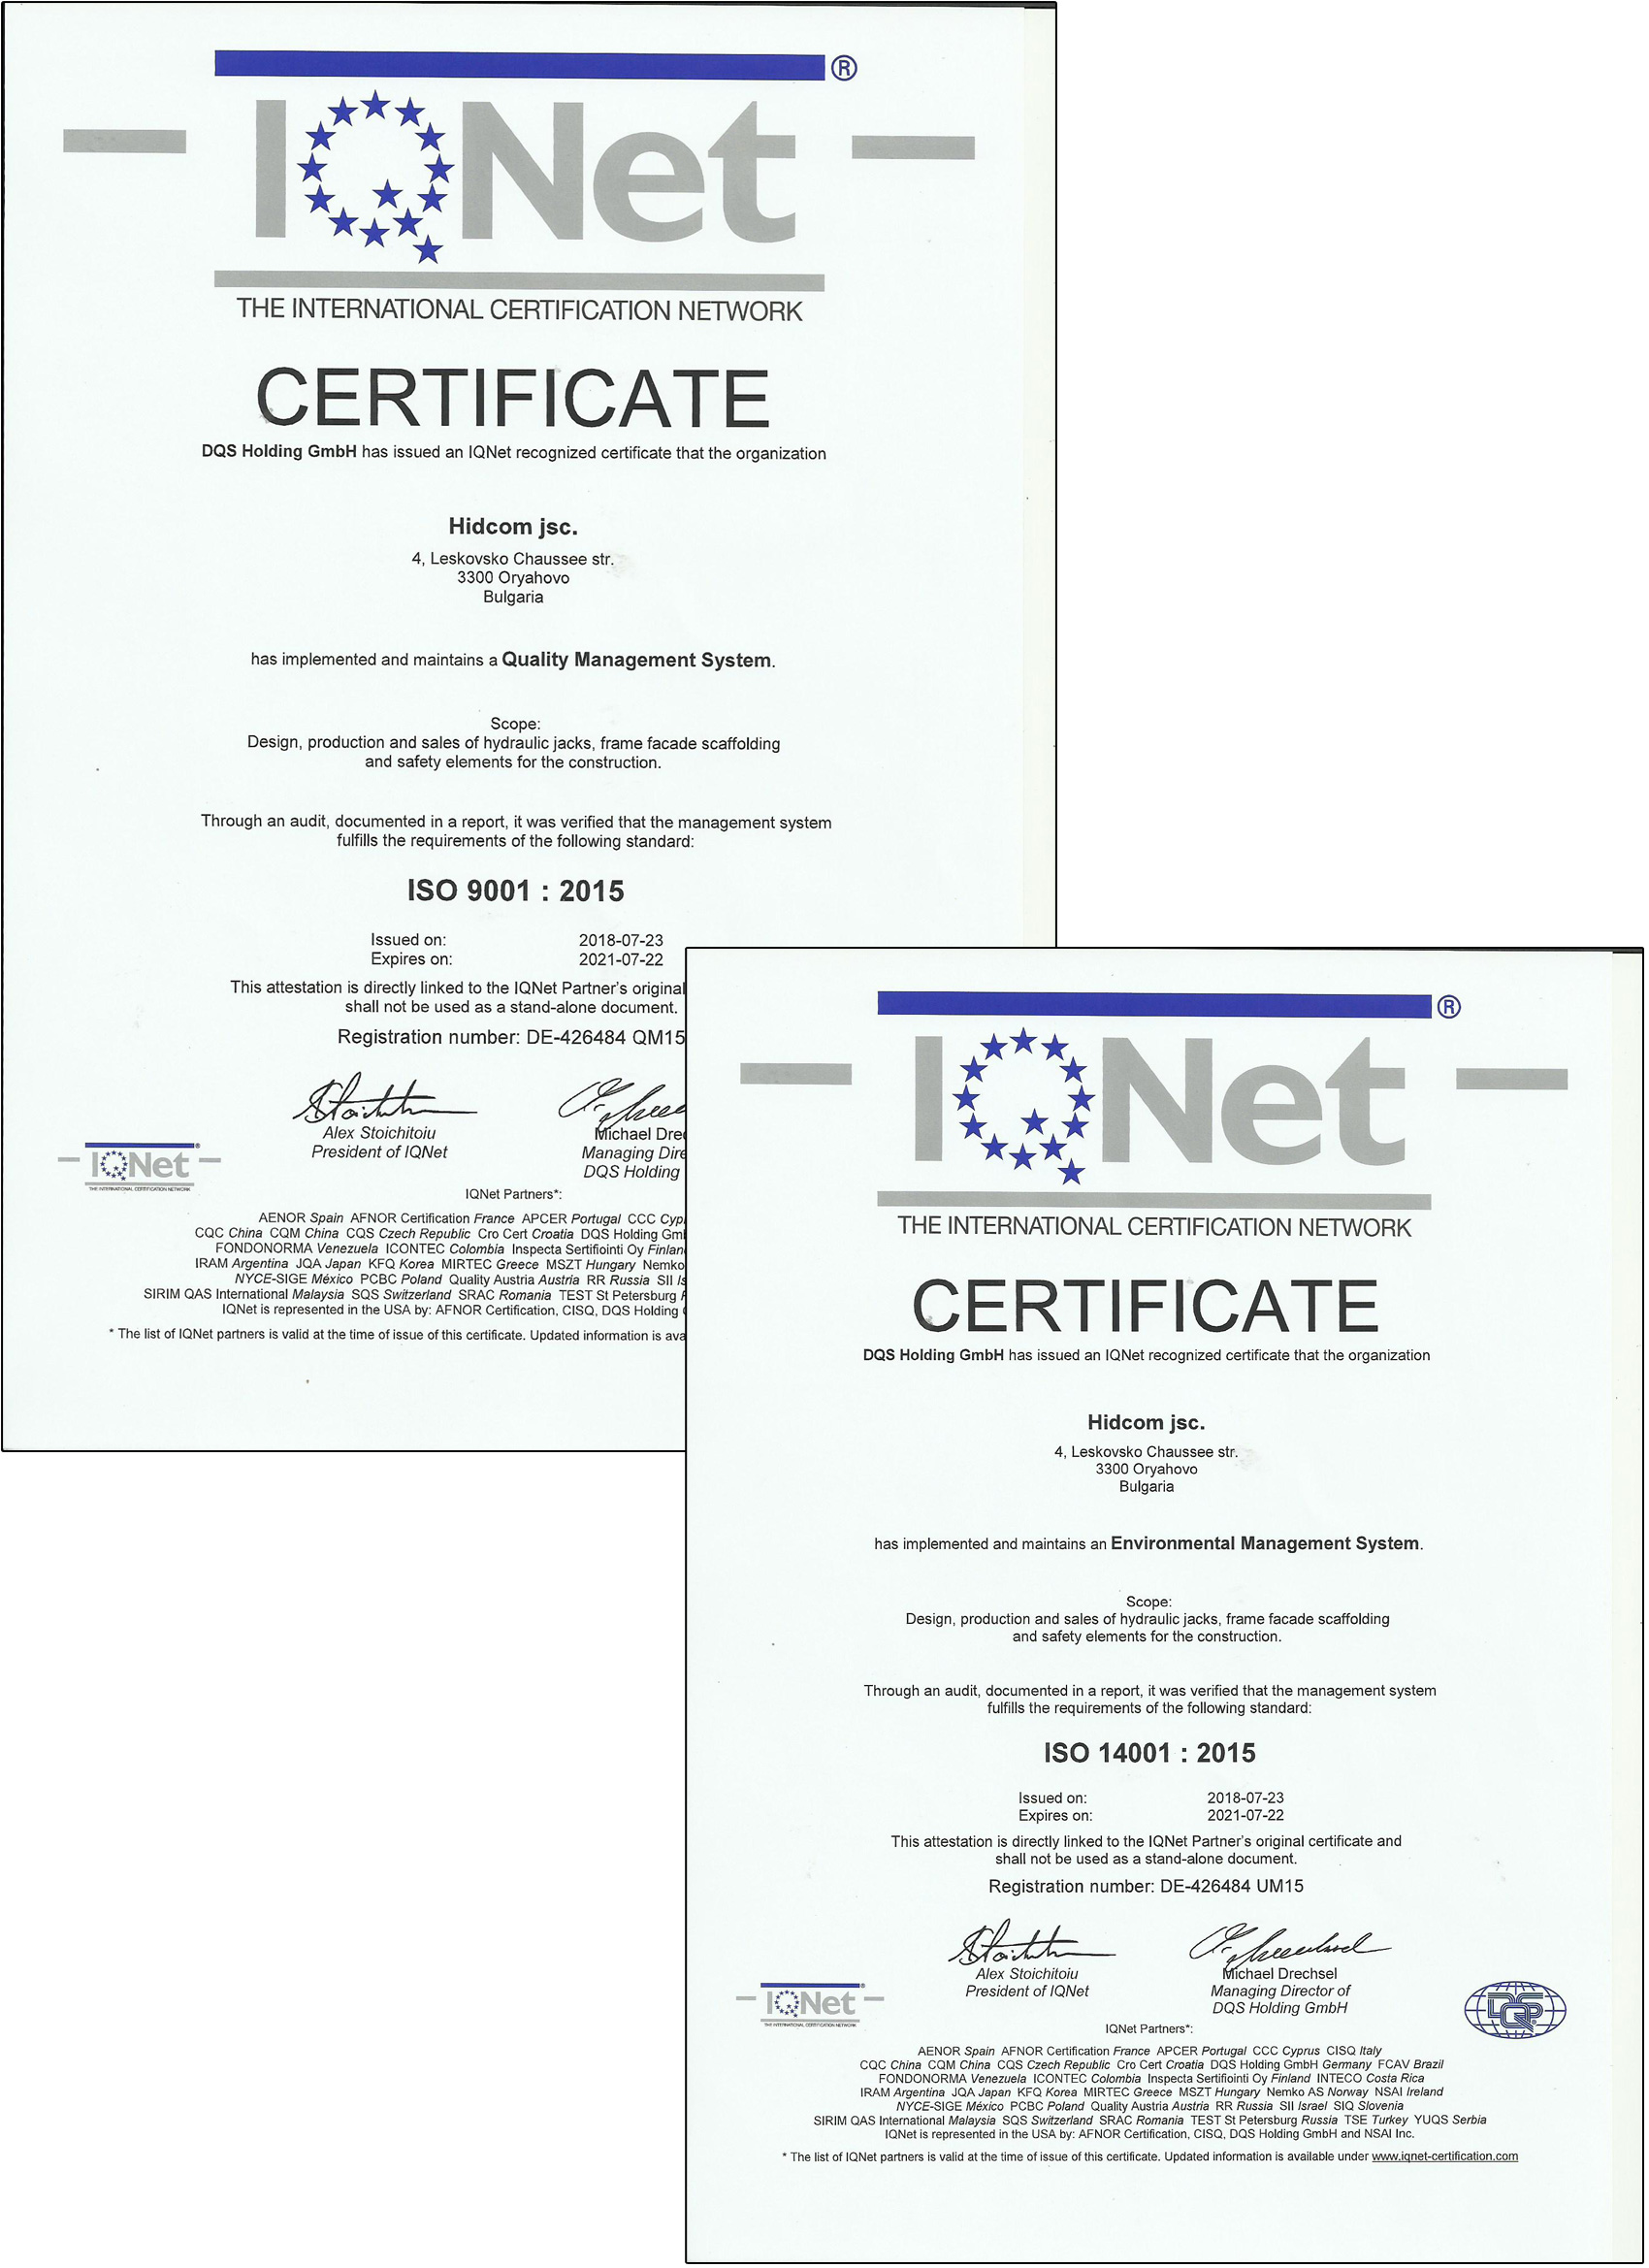 IQnet Certificates ISO 9001-2015 and 14001-2015